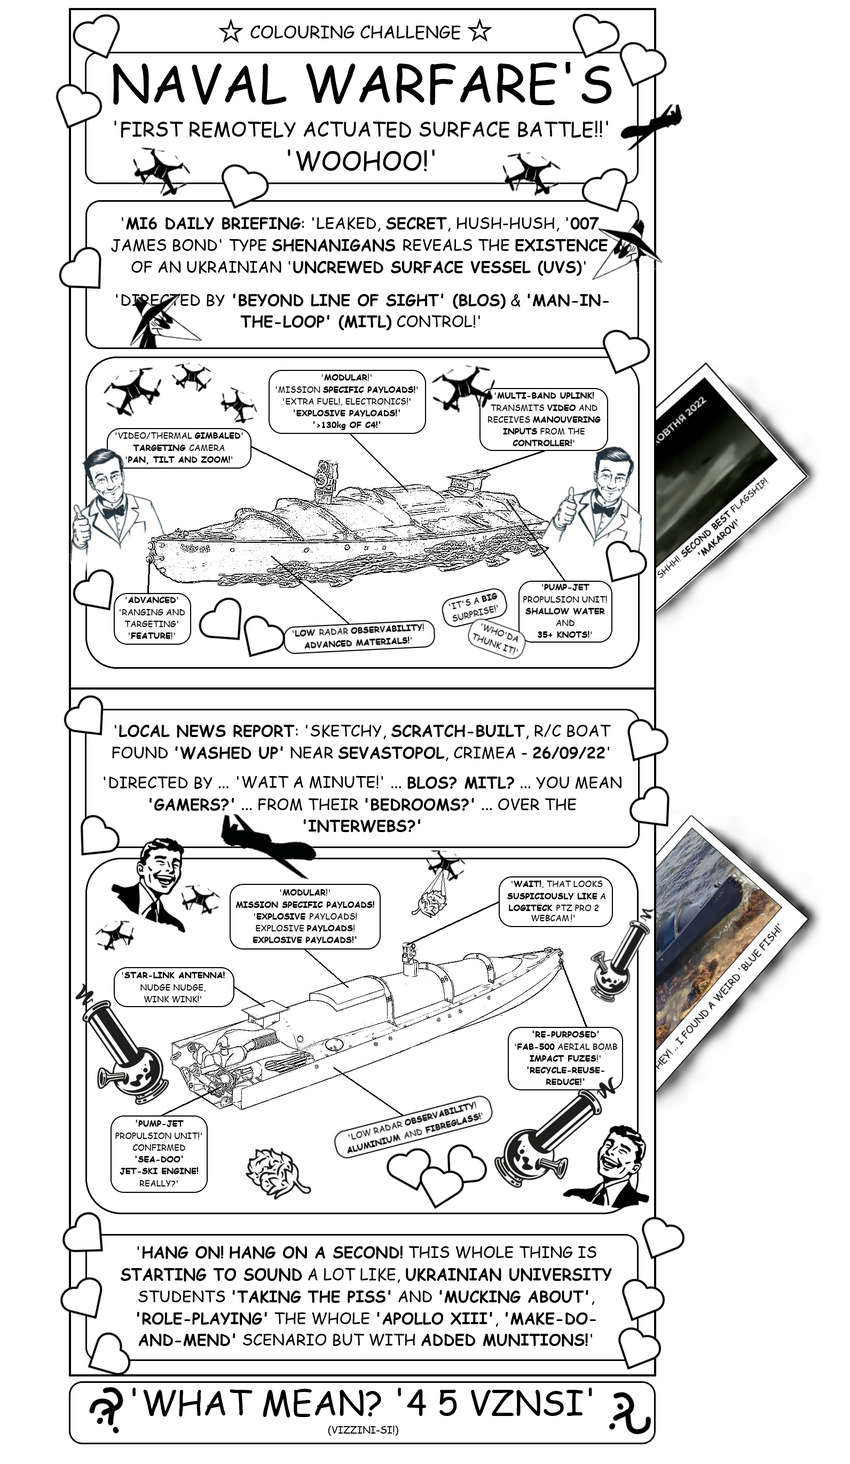 coloring book page about naval drones destroying Russian things